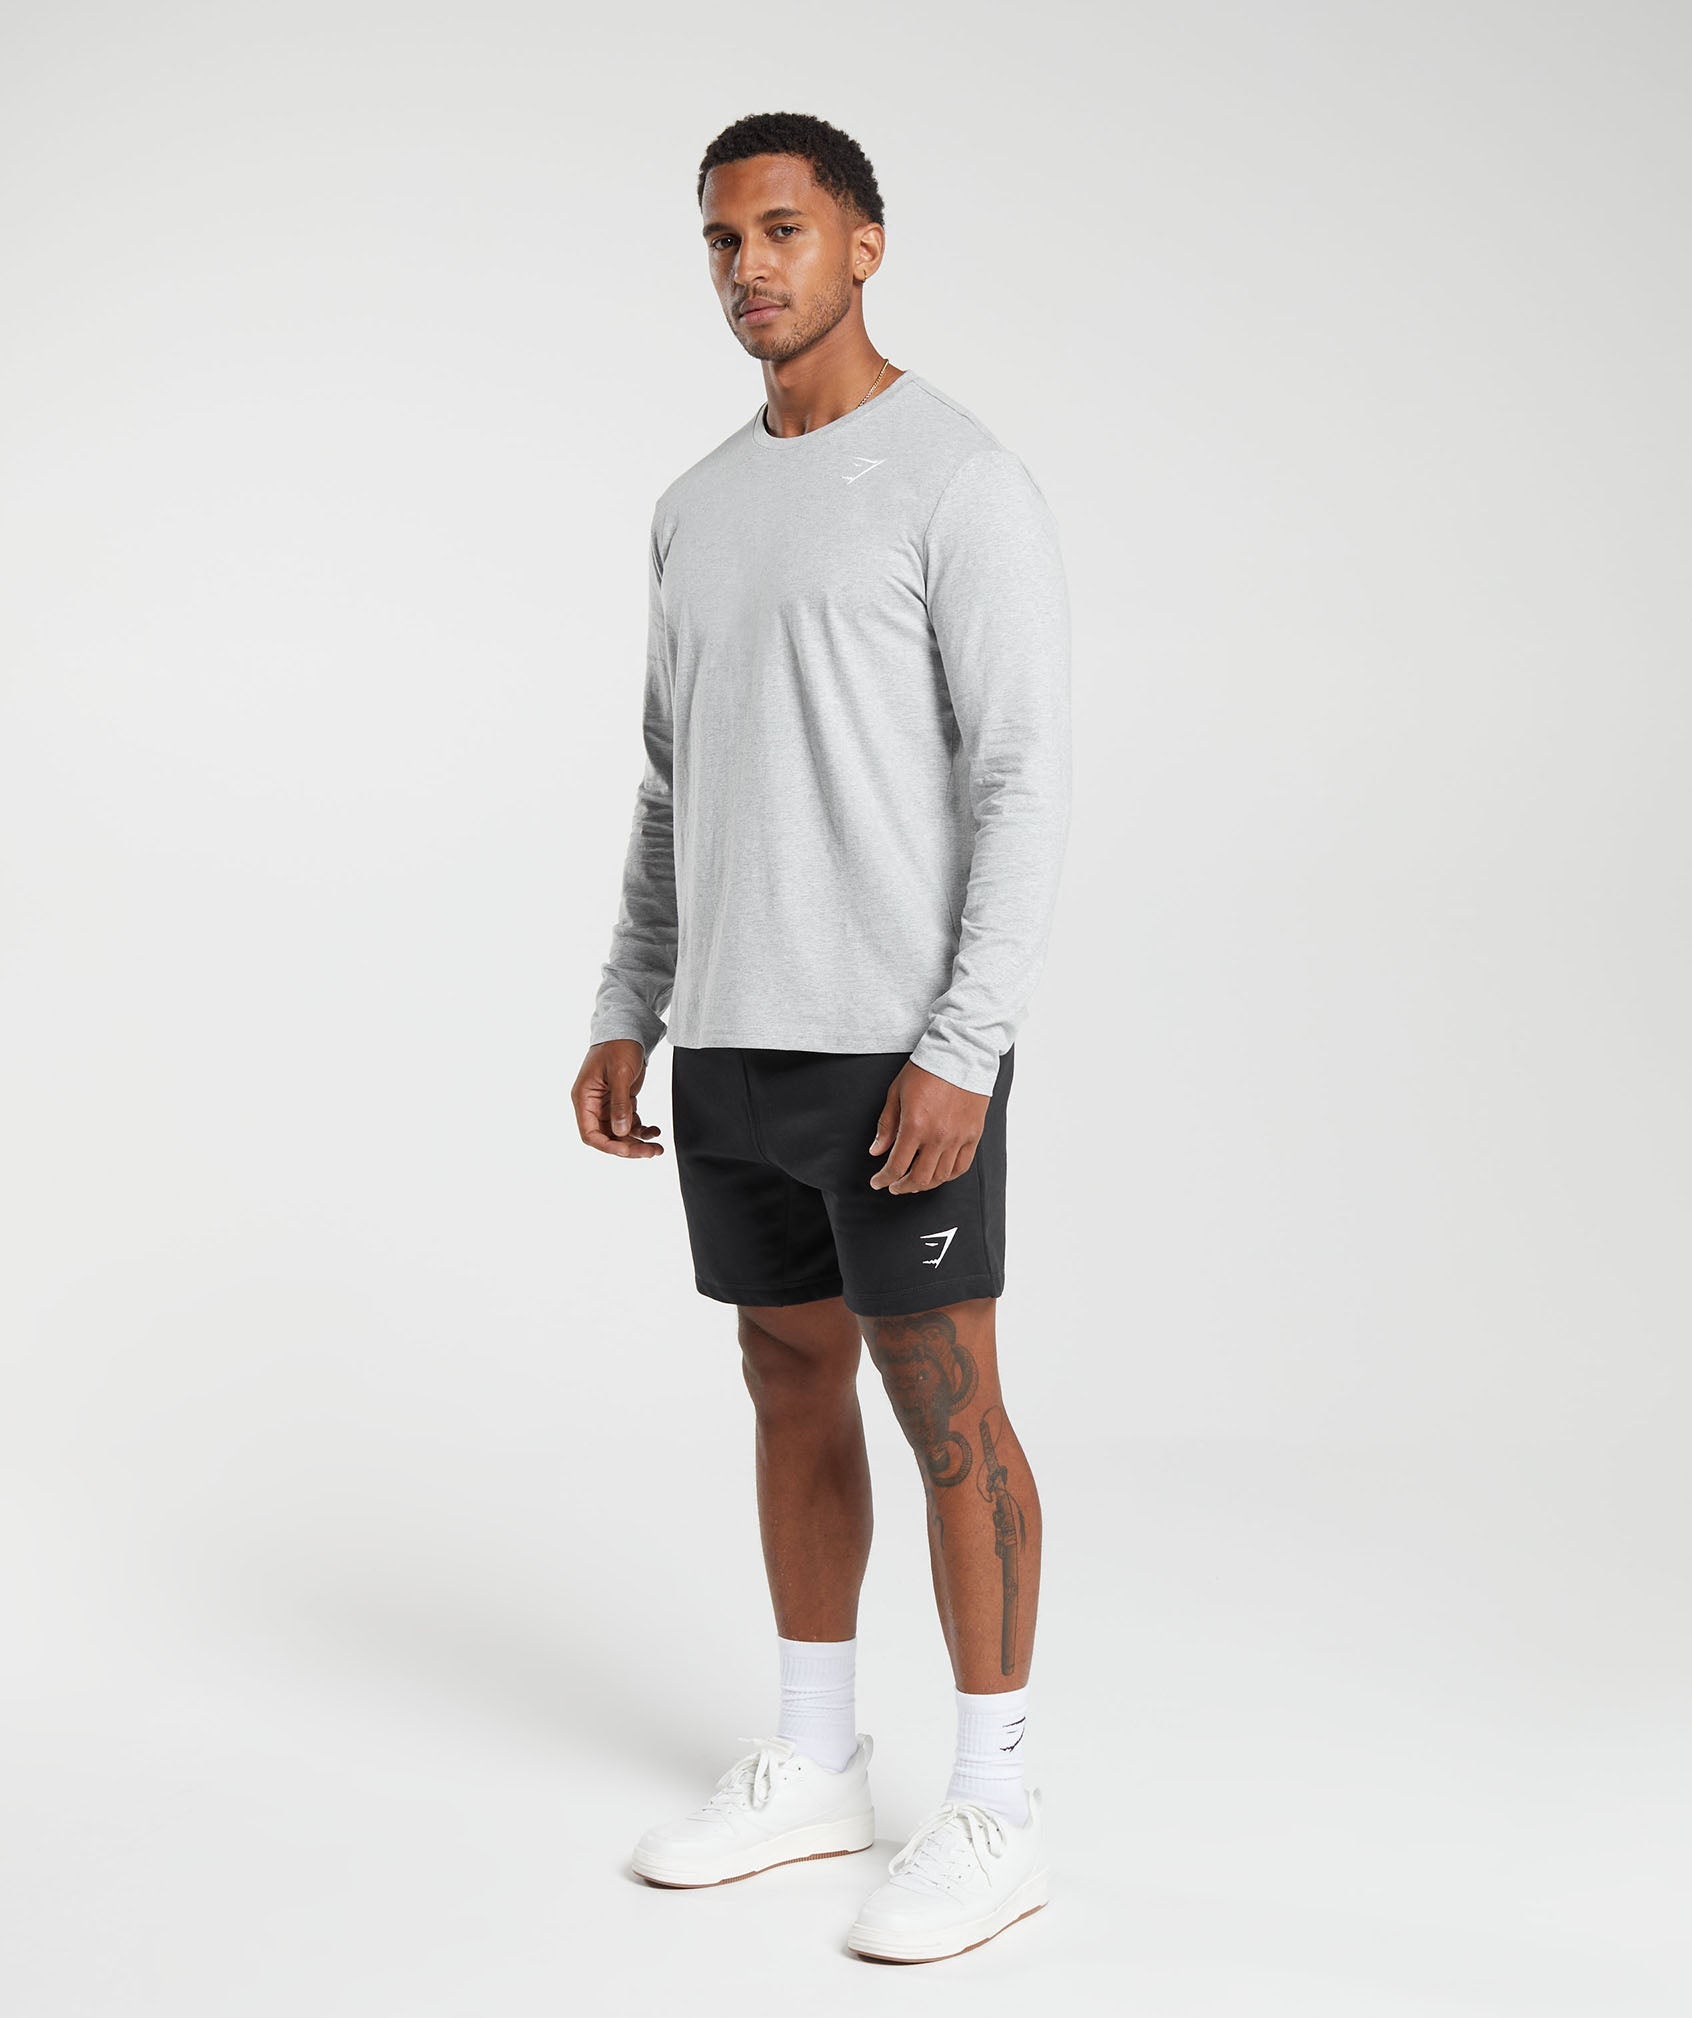 Crest Long Sleeve T-Shirt in Light Grey Marl - view 4